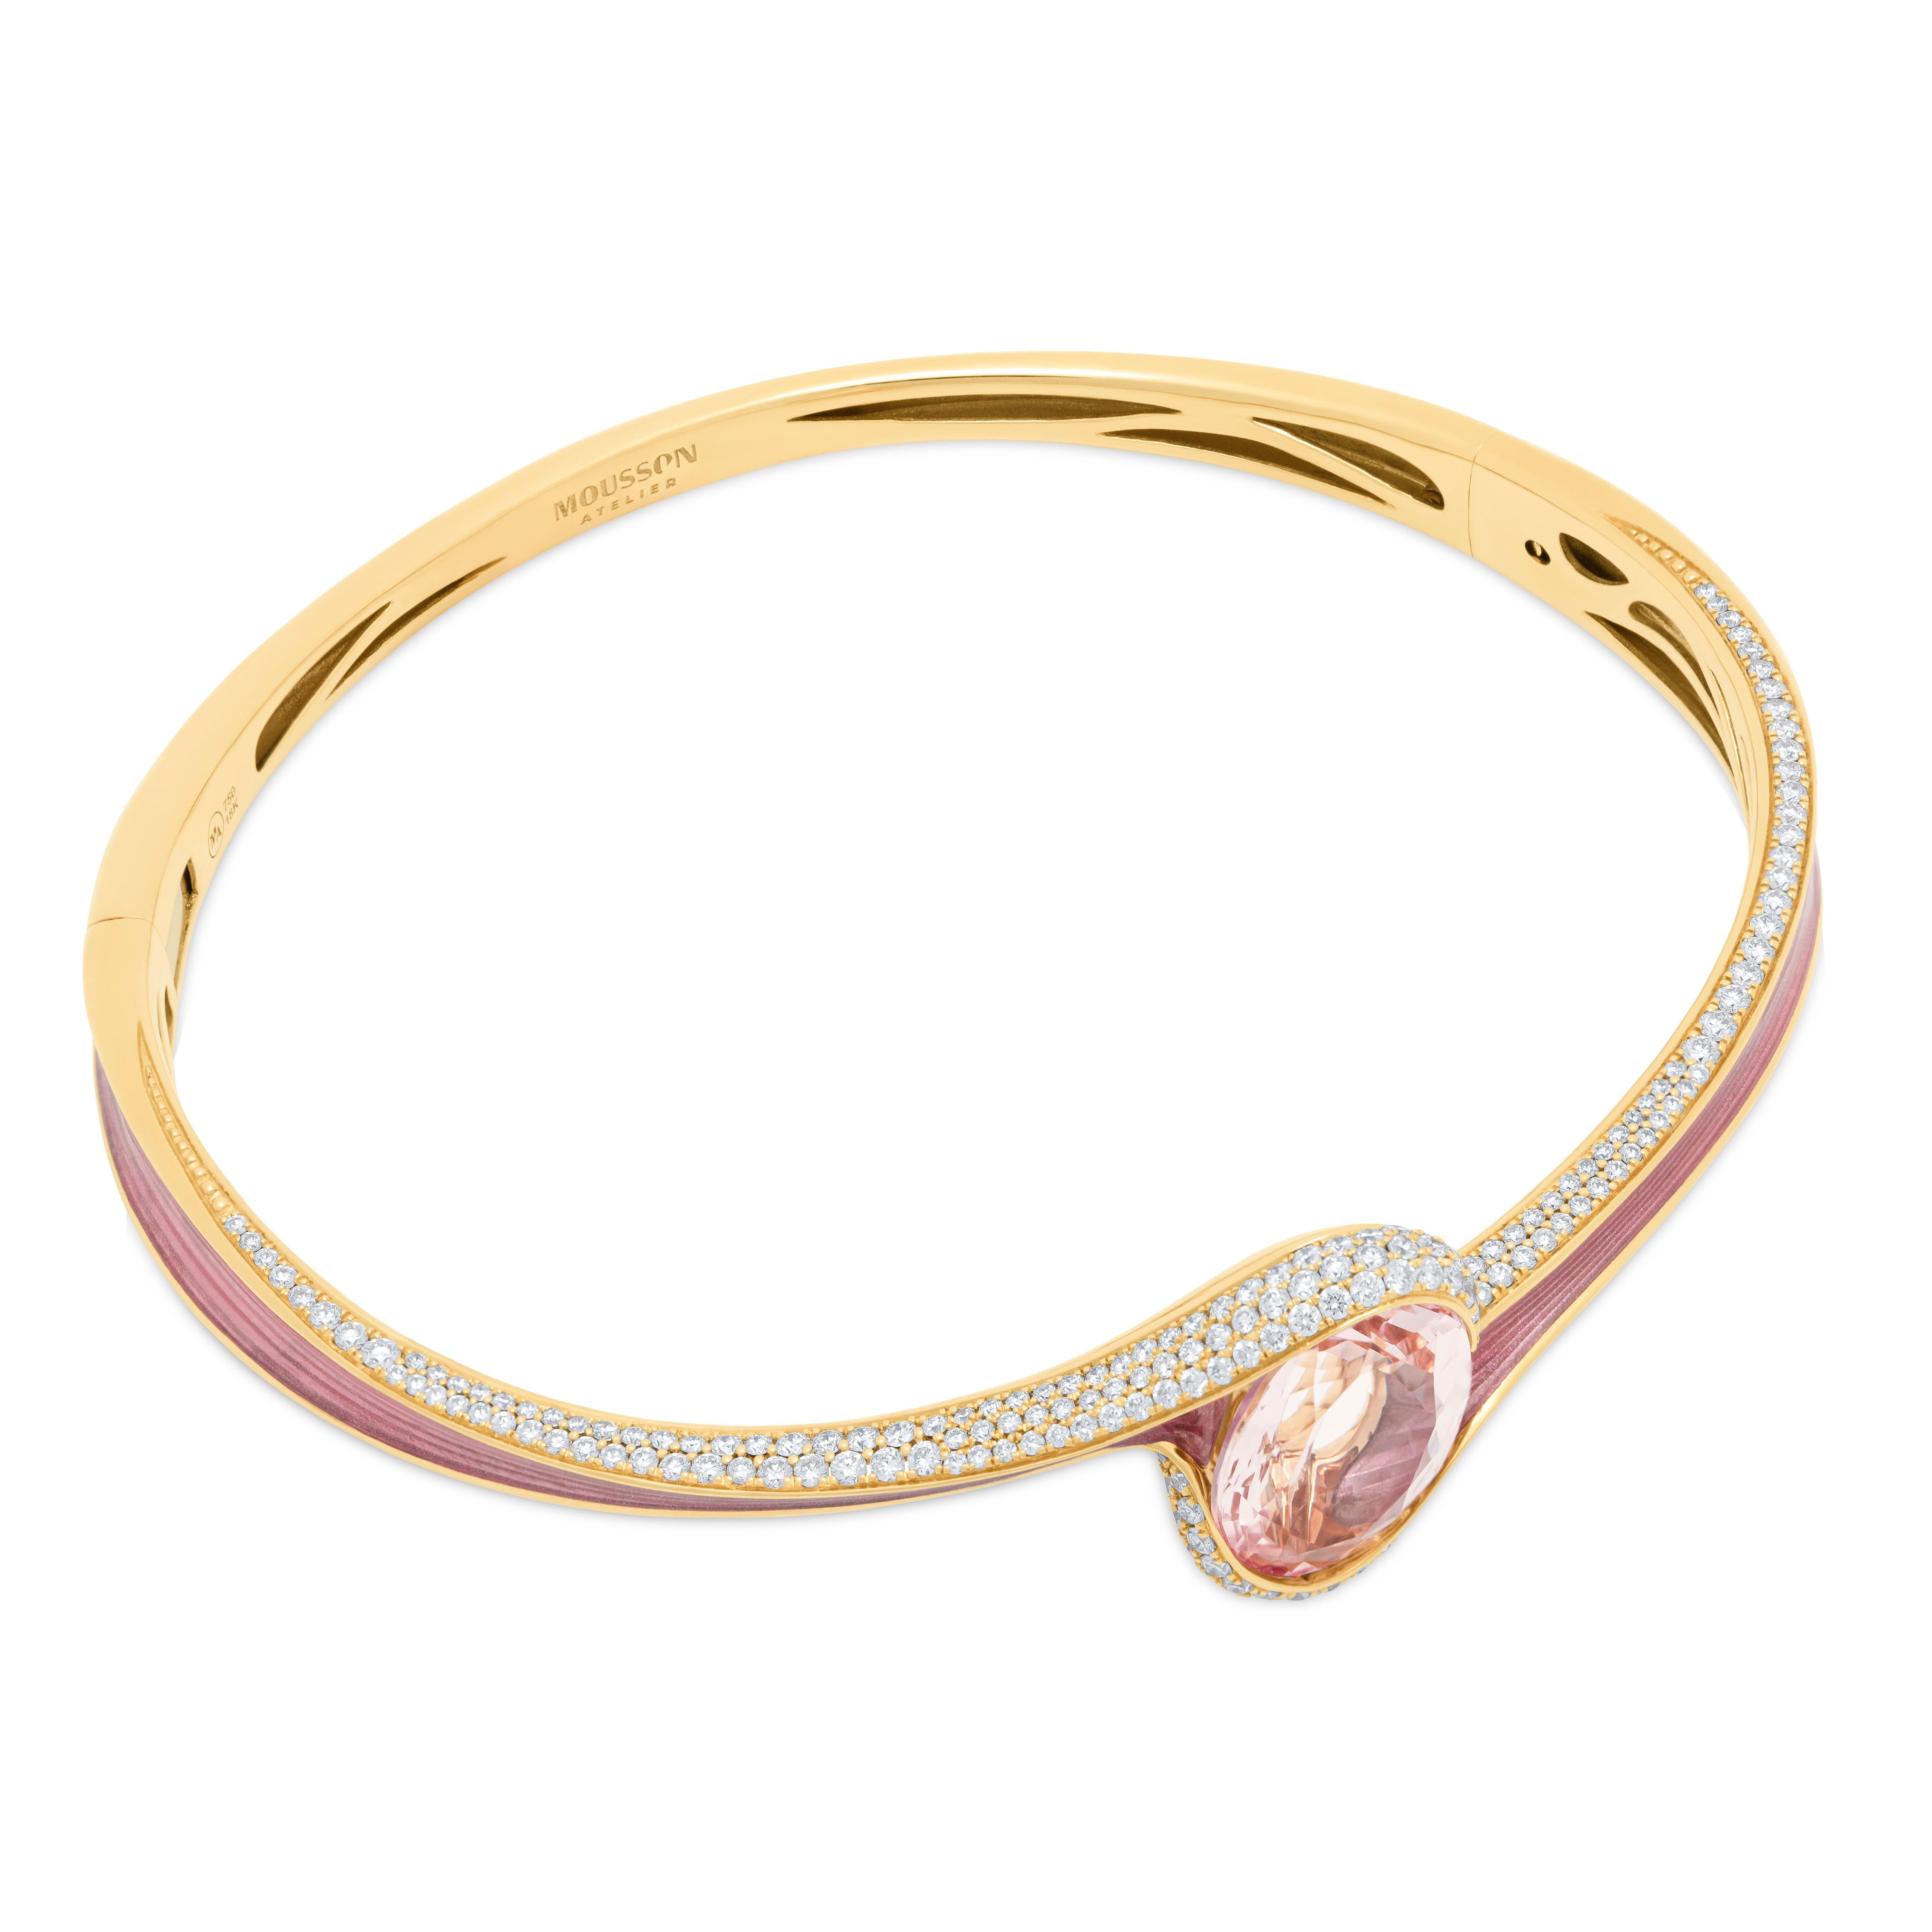 Morganite 3.48 Carat Diamonds 18 Karat Yellow Gold Enamel Bangle Bracelet

Introducing our breathtaking Bracelet from the highly-coveted Melted Colors Collection, an opulent blend of every color under the sun. This stunning piece features a 3.48